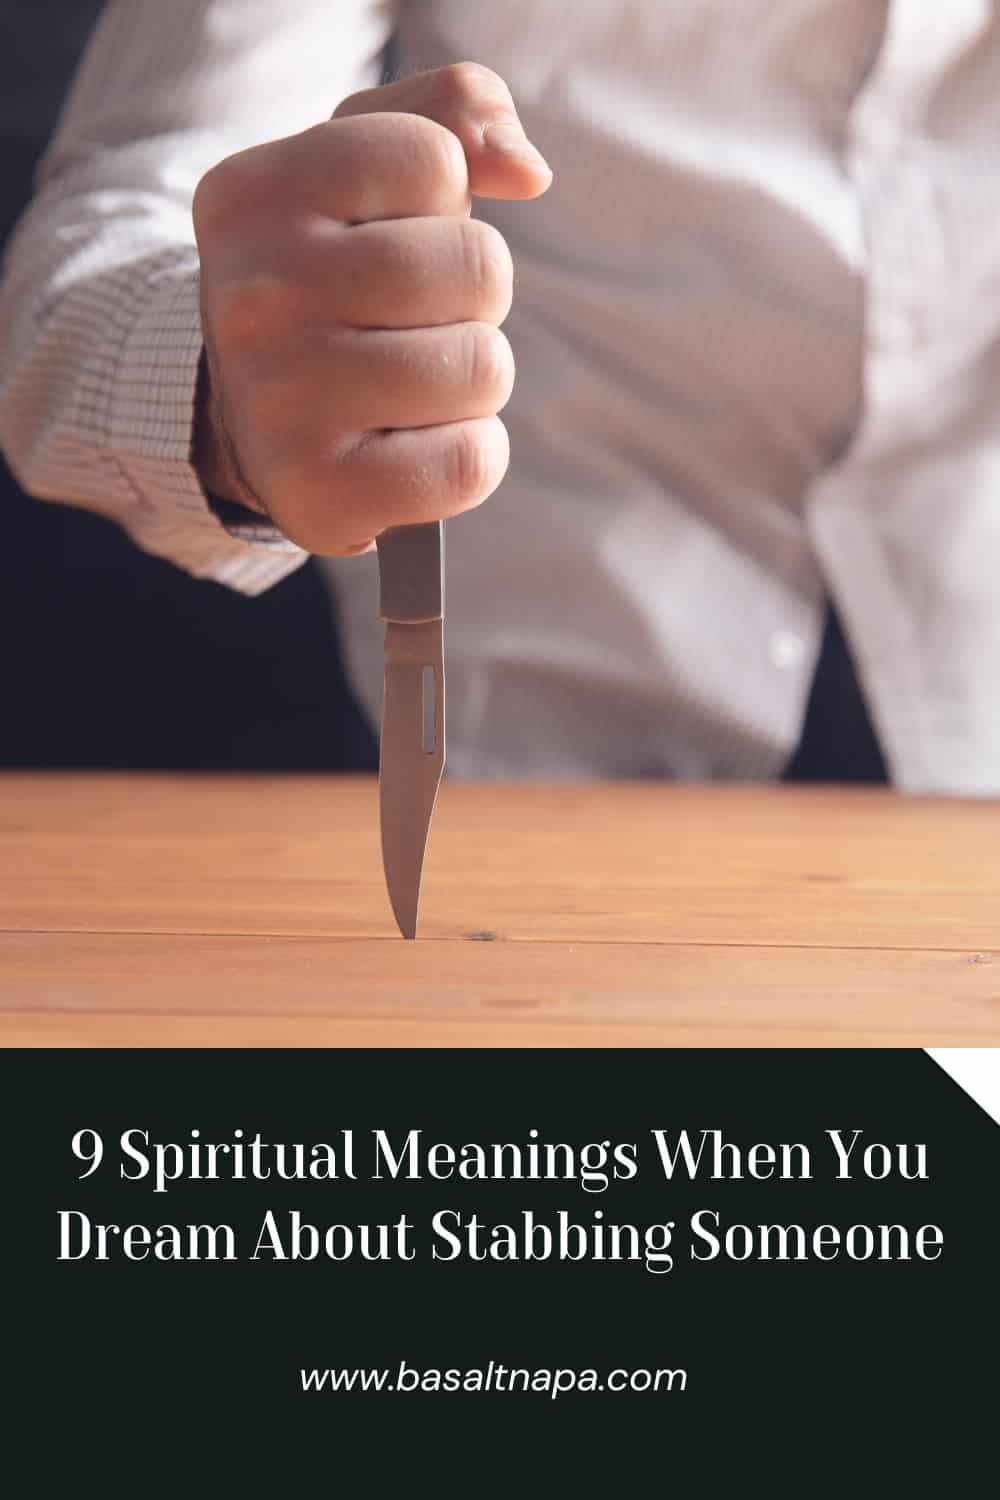 9 Spiritual Meanings When You Dream About Stabbing Someone